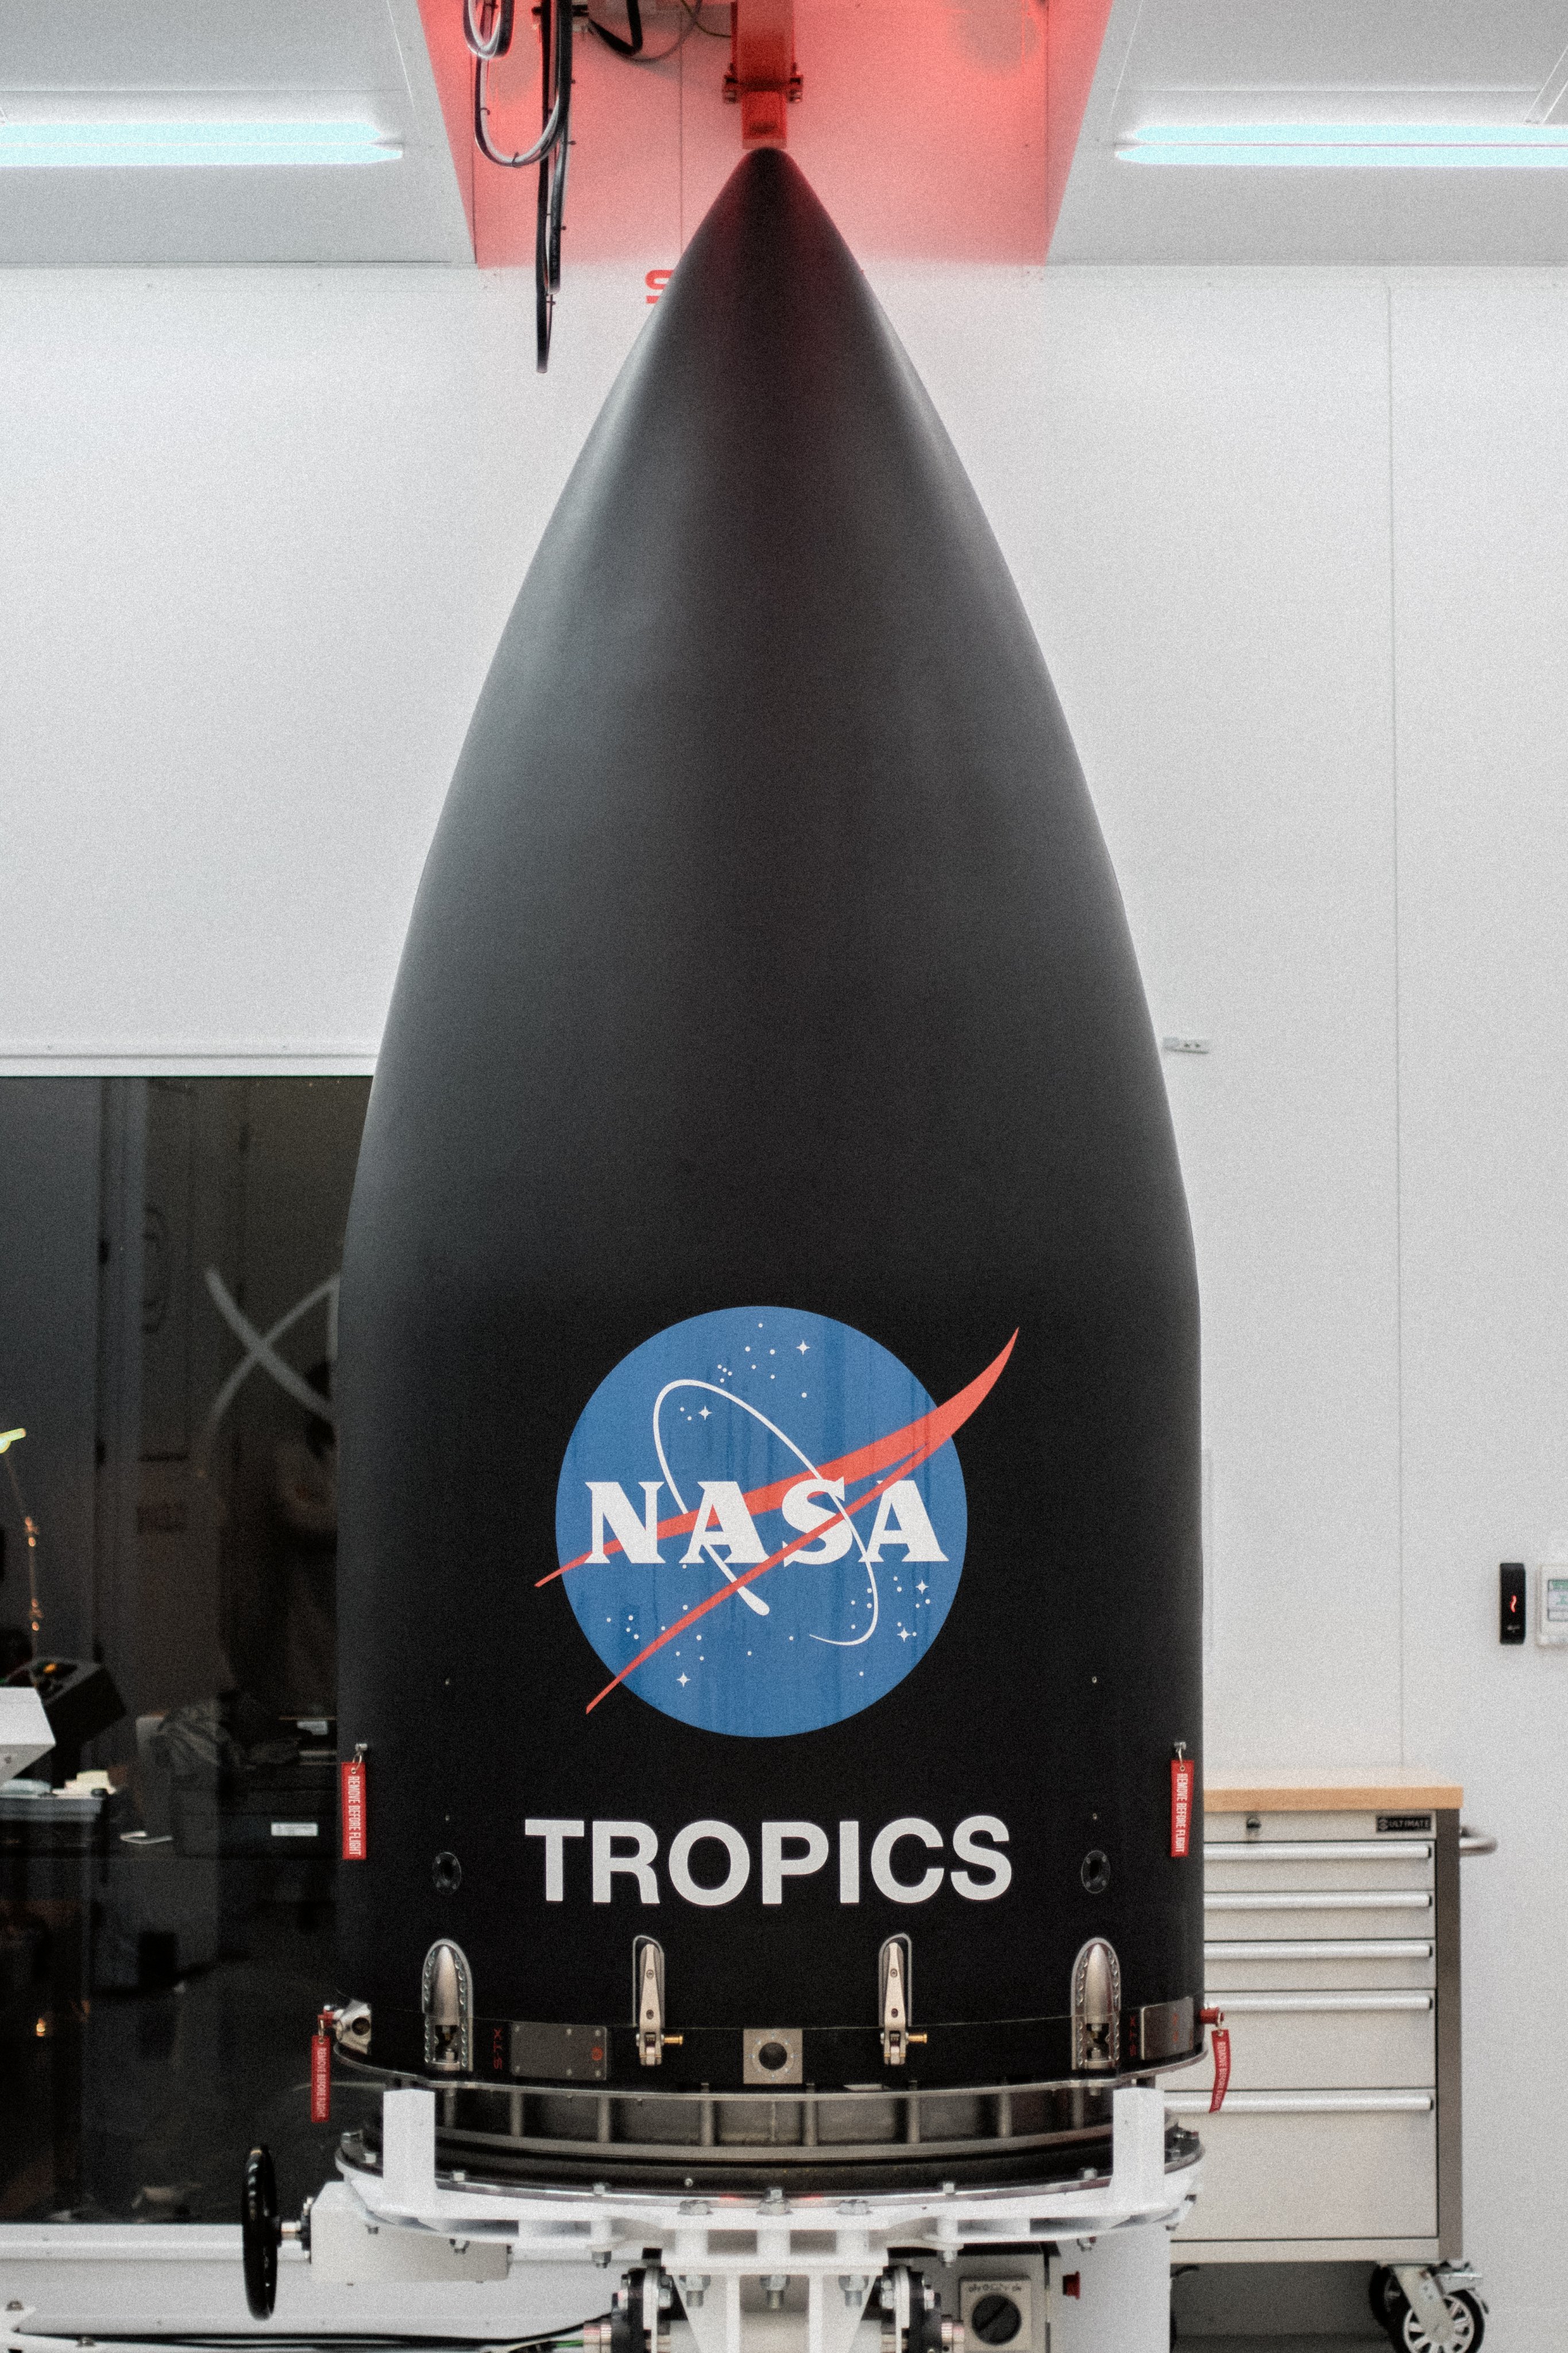 (Updated) NASA's TROPICS mission launch delayed due to weather